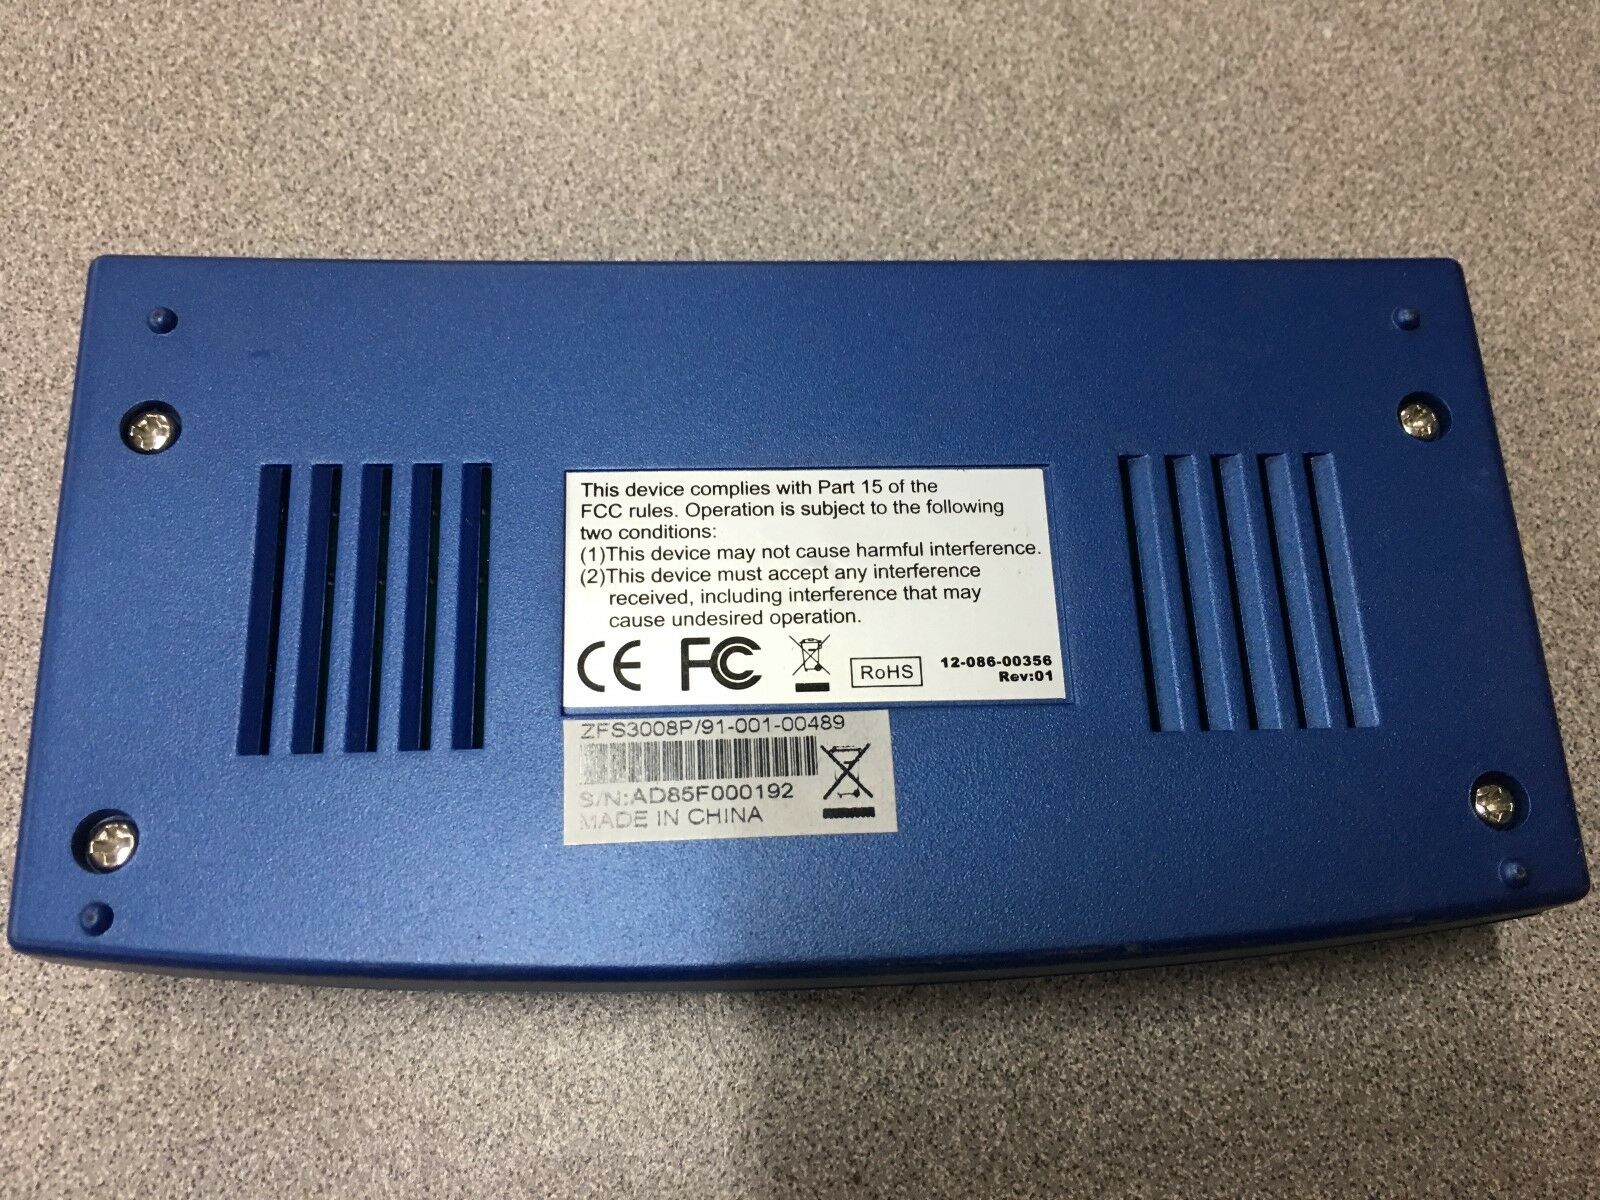 USED ZONET ETHERNET SWITCH 2FS3008P